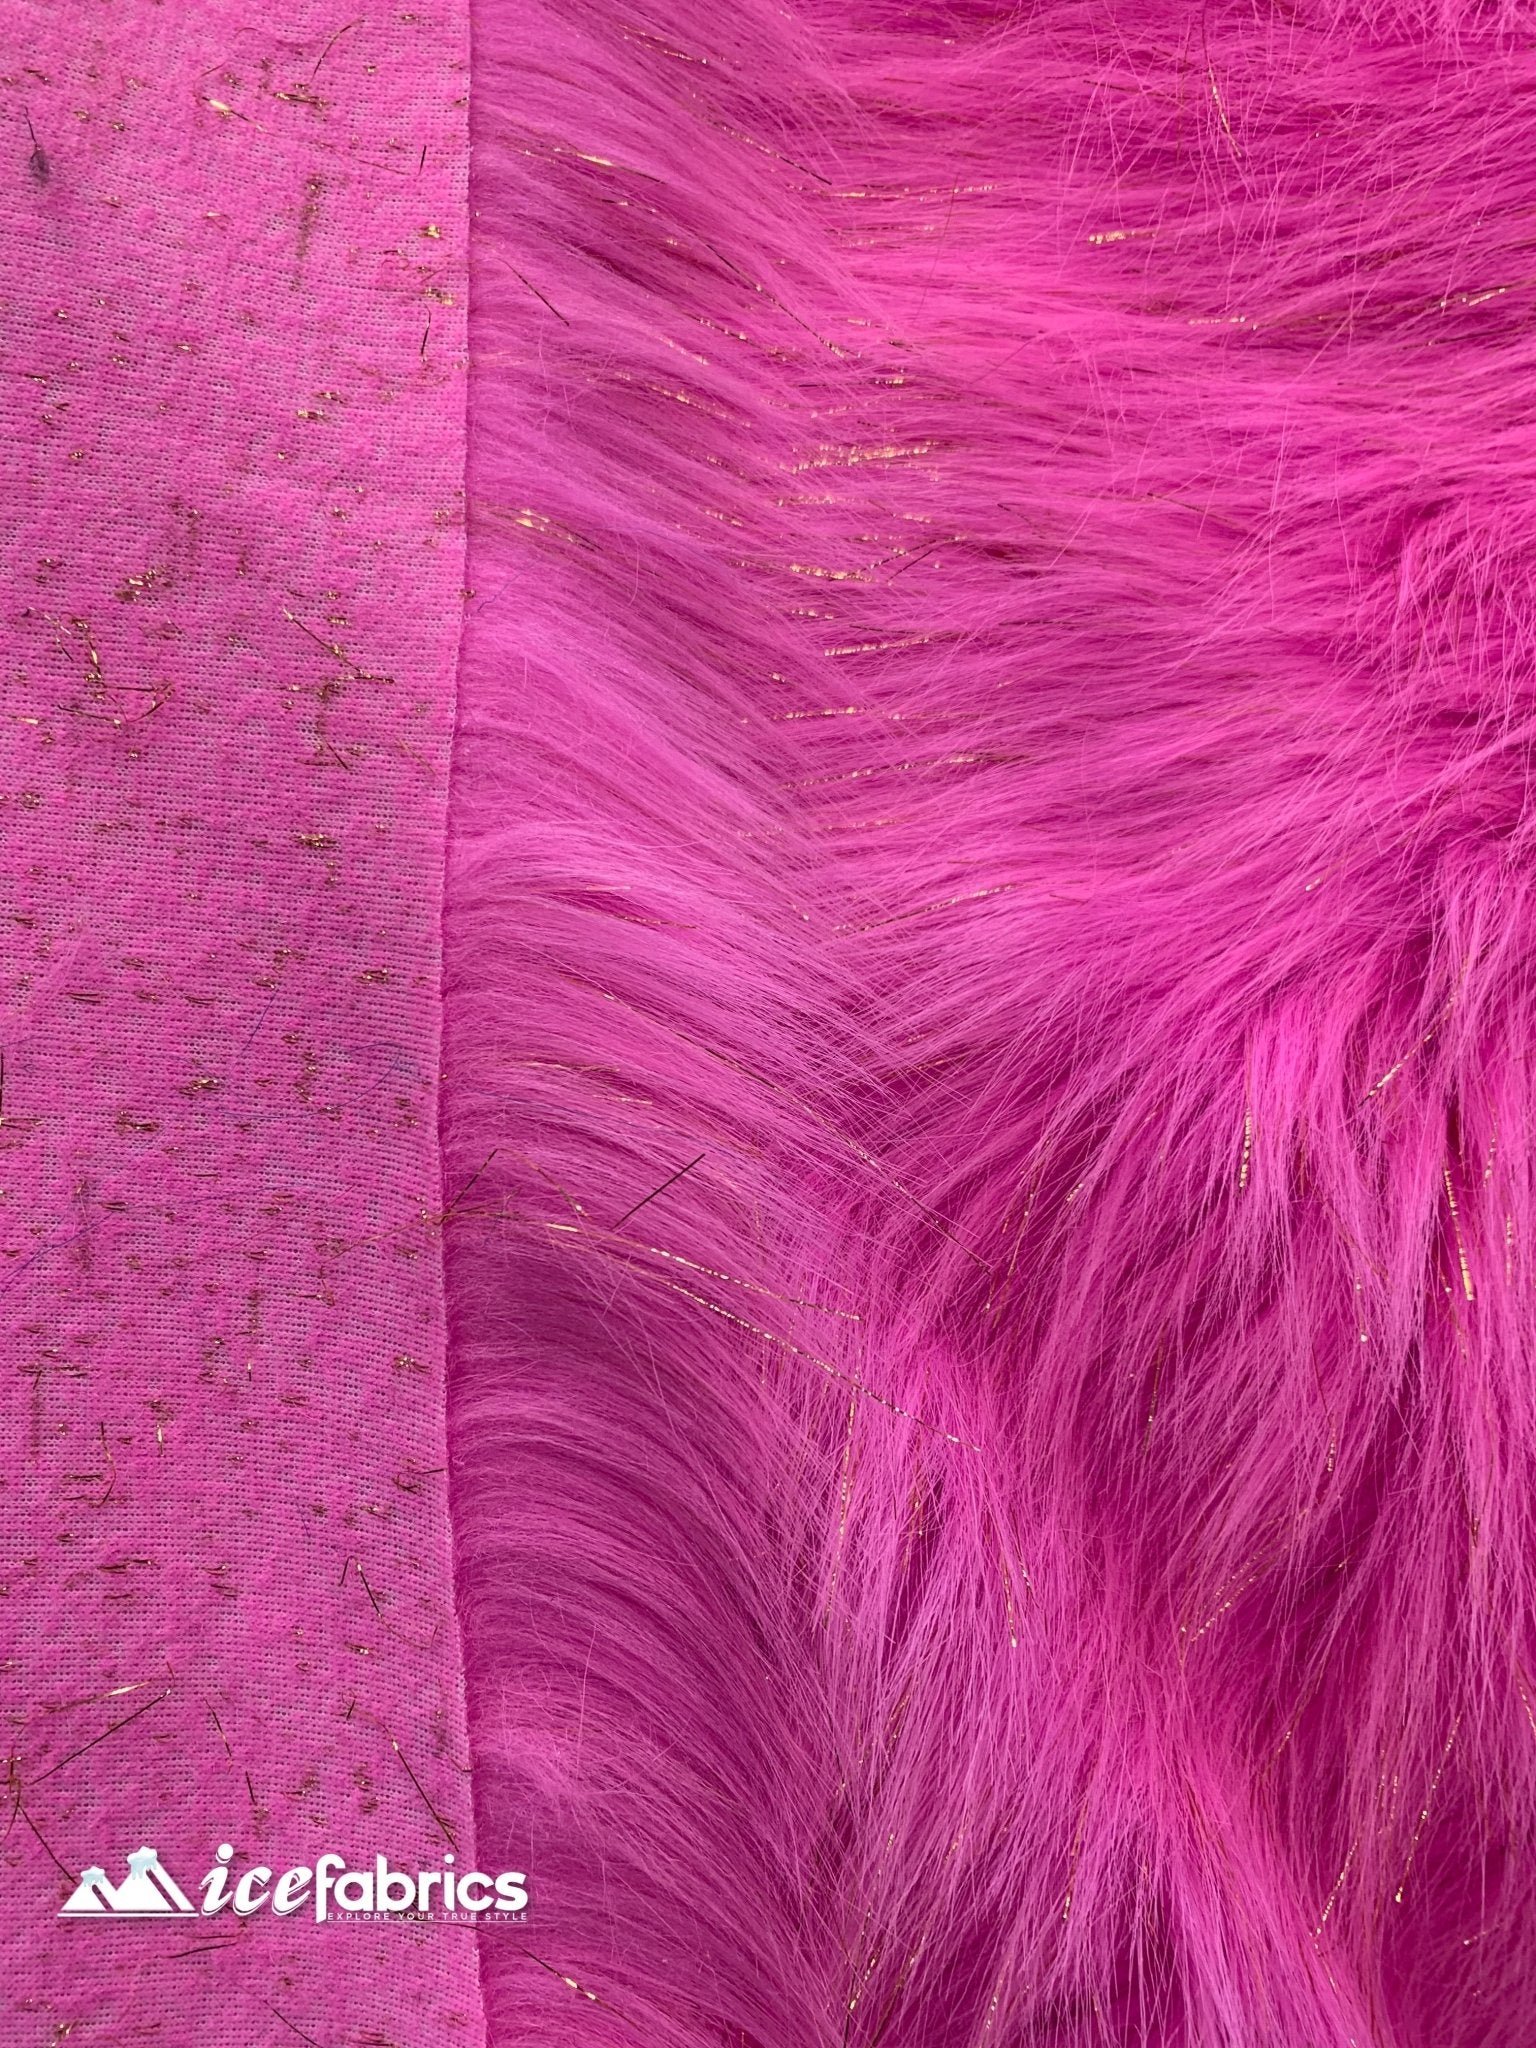 Tinsel Long Pile Mongolian Faux Fur Fabric By The Yard Fashion FabricICEFABRICICE FABRICSPinkBy The Yard (60 inches Wide)Tinsel Long Pile Mongolian Faux Fur Fabric By The Yard Fashion Fabric ICEFABRIC